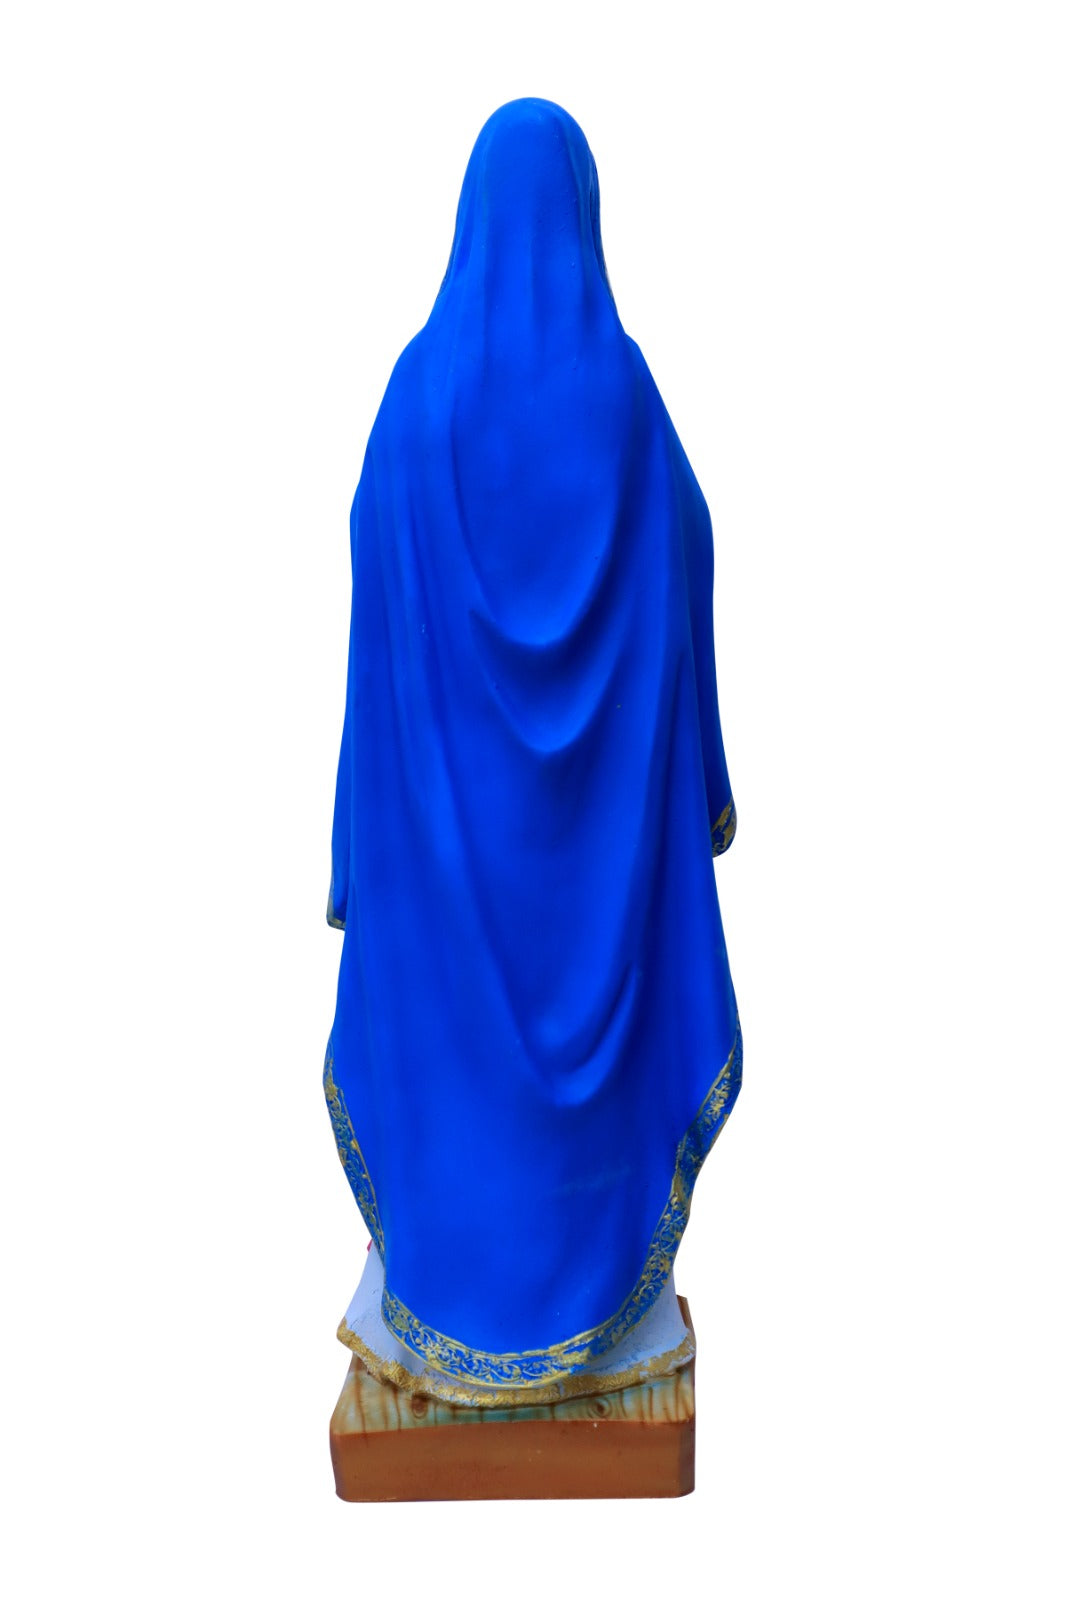 Lady of Lourdes Statue - 23 Inches | Poly Marble Material | Living Words